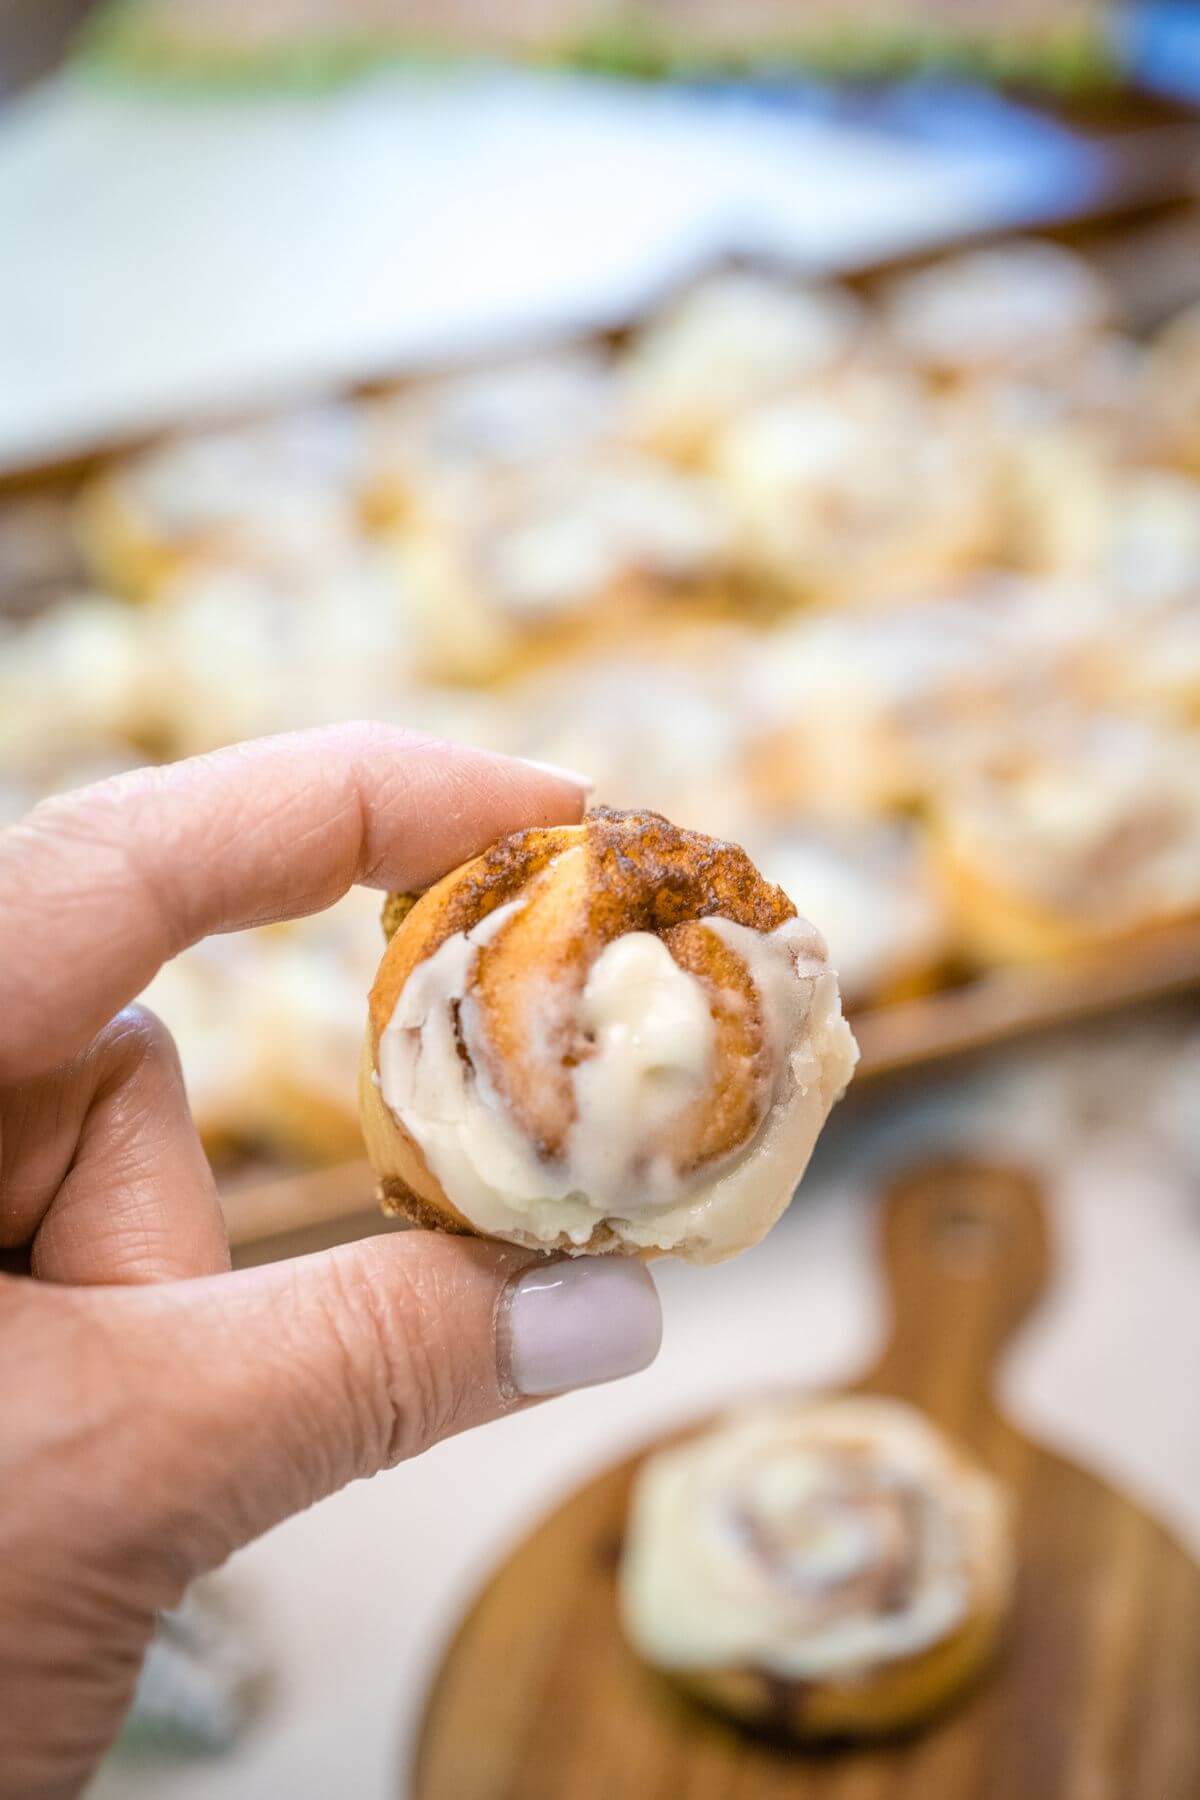 A tiny cinnamon bun is held up by someone's hand high above the pan.